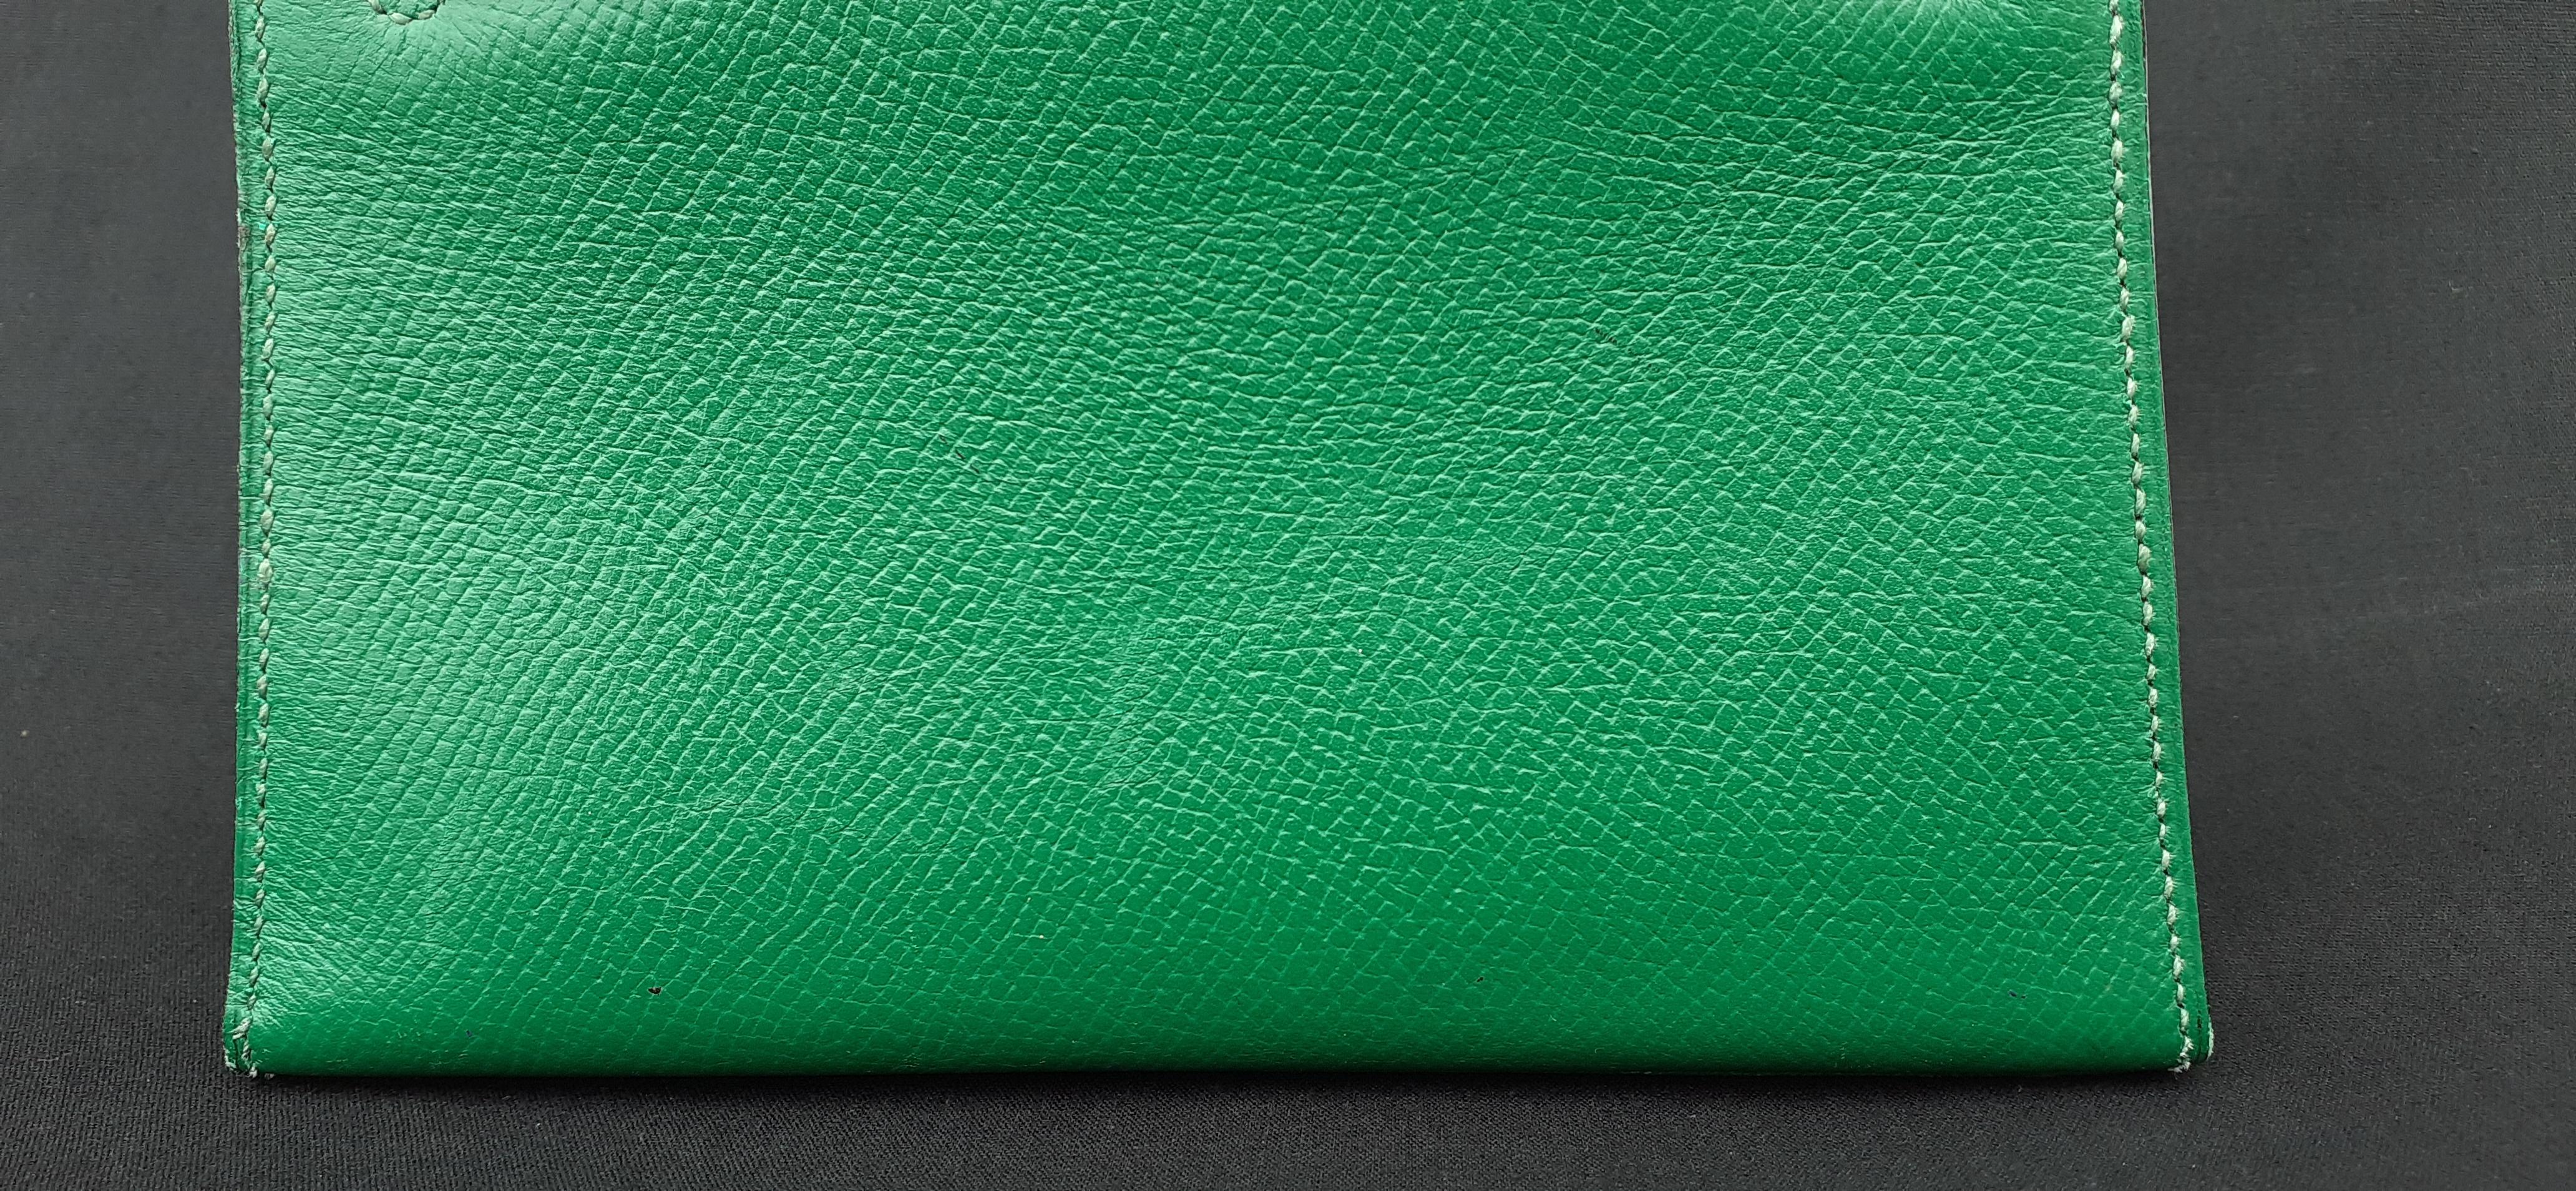 Women's Exceptional Hermès Vintage Micro Kelly 15 cm Sellier Bag Green Leather Gold Hdw